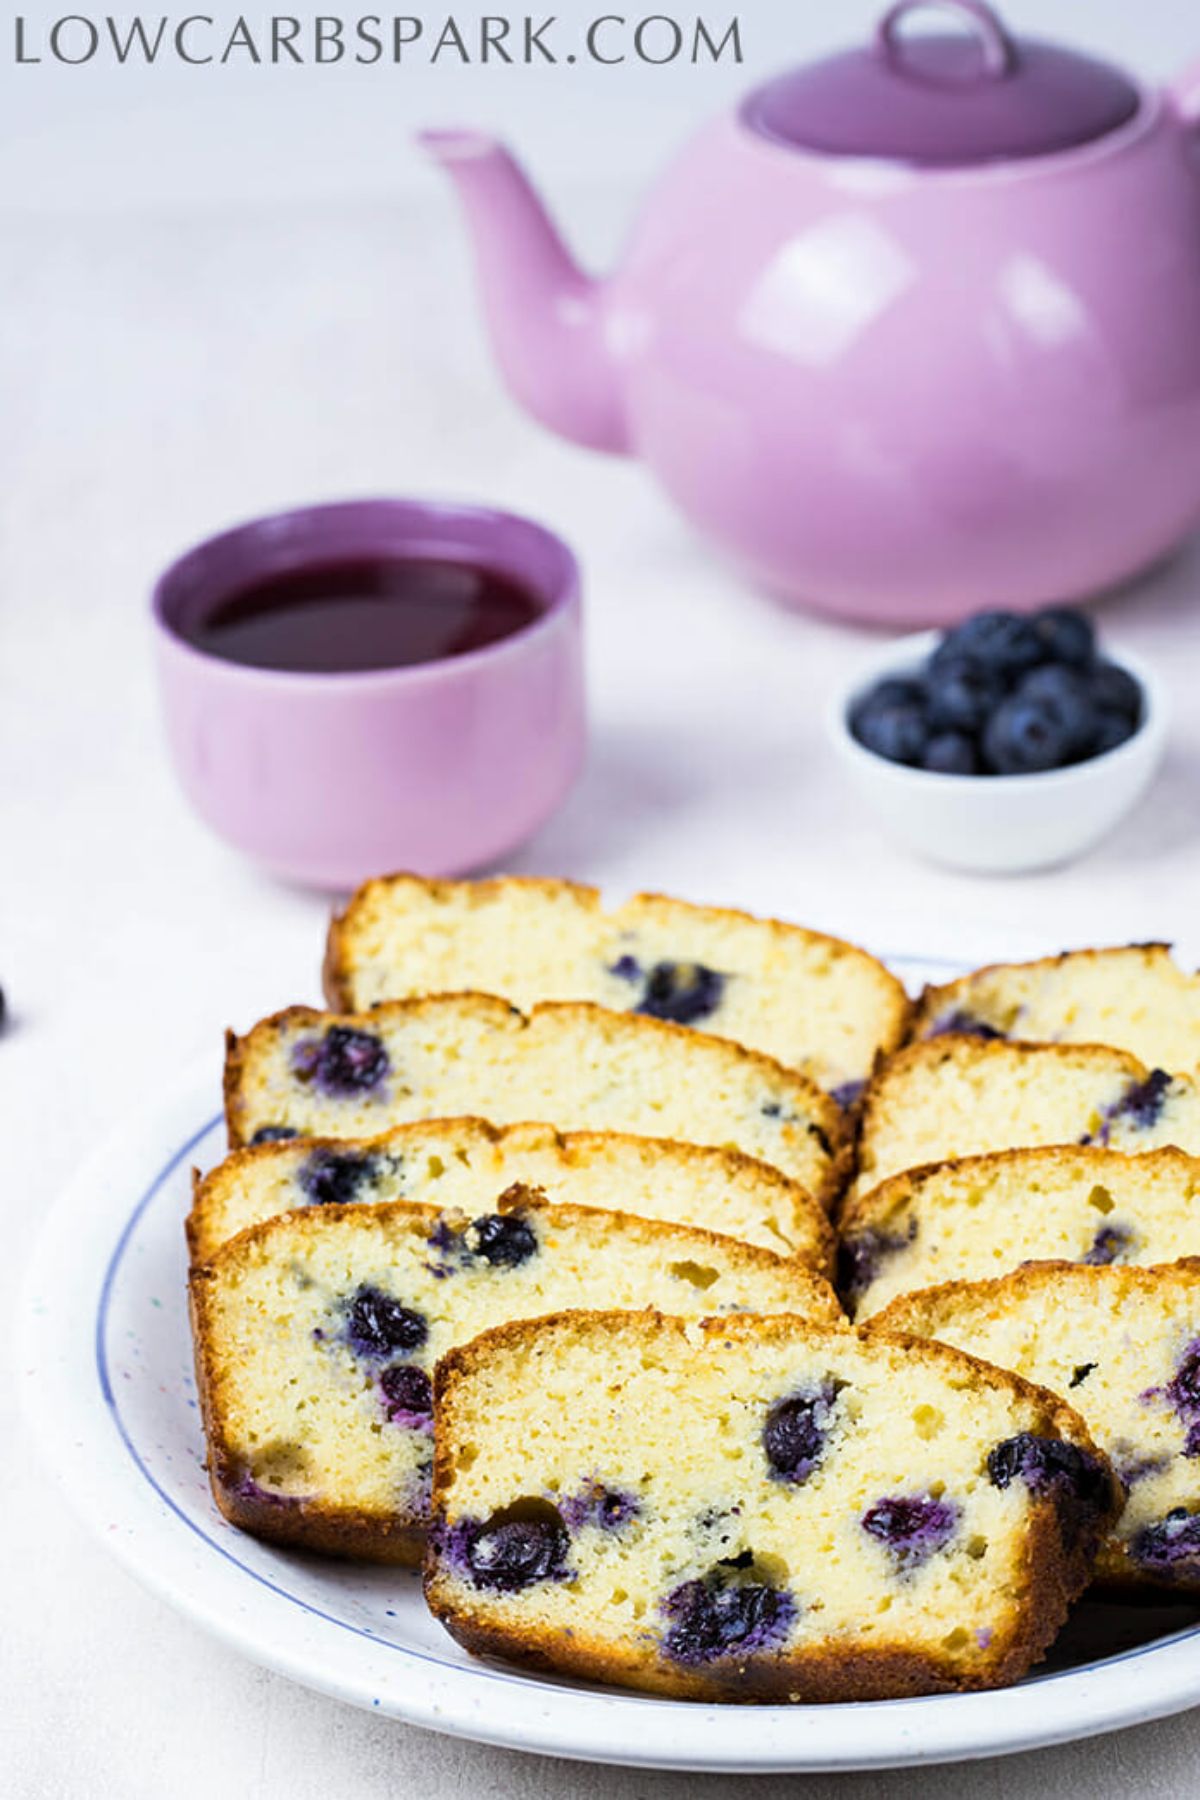 A lilac tea pot and teacup is in the background with a small white bowl of blueberries next to them. In the front is a white plate with a blue rim and stacked slices of blueberry loaf on it